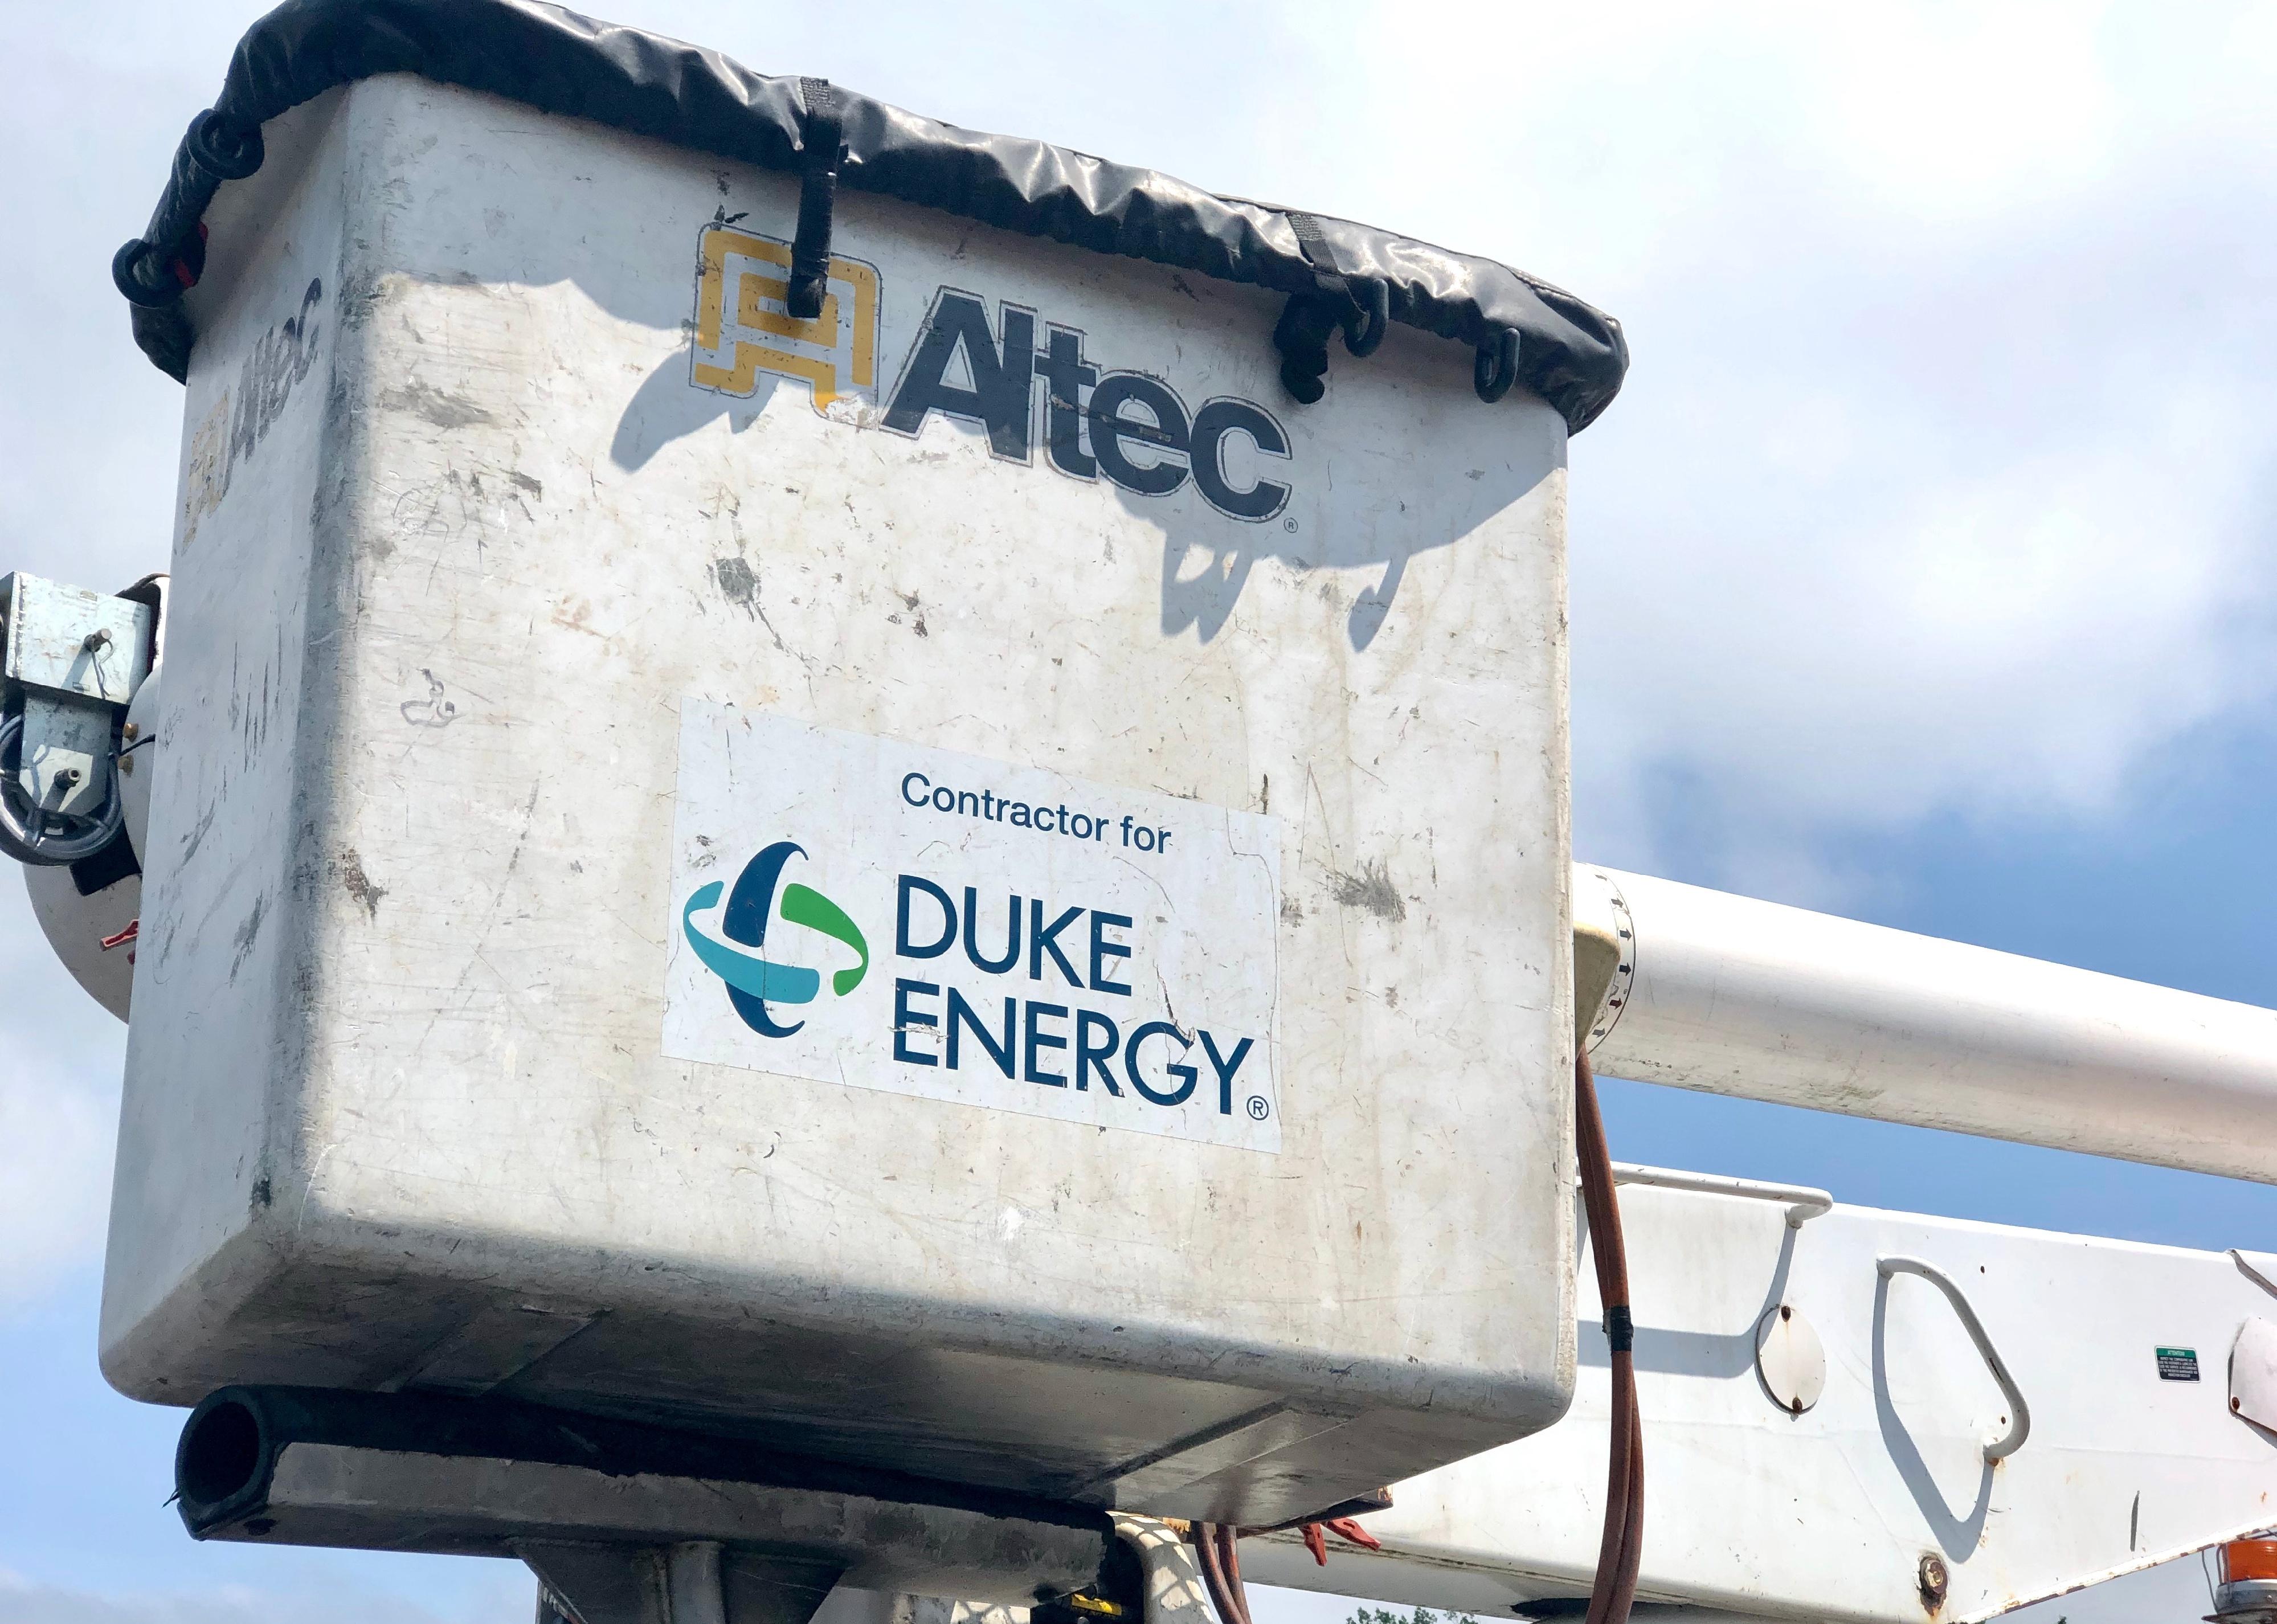 An electrical repair truck with the logo for Duke Energy.